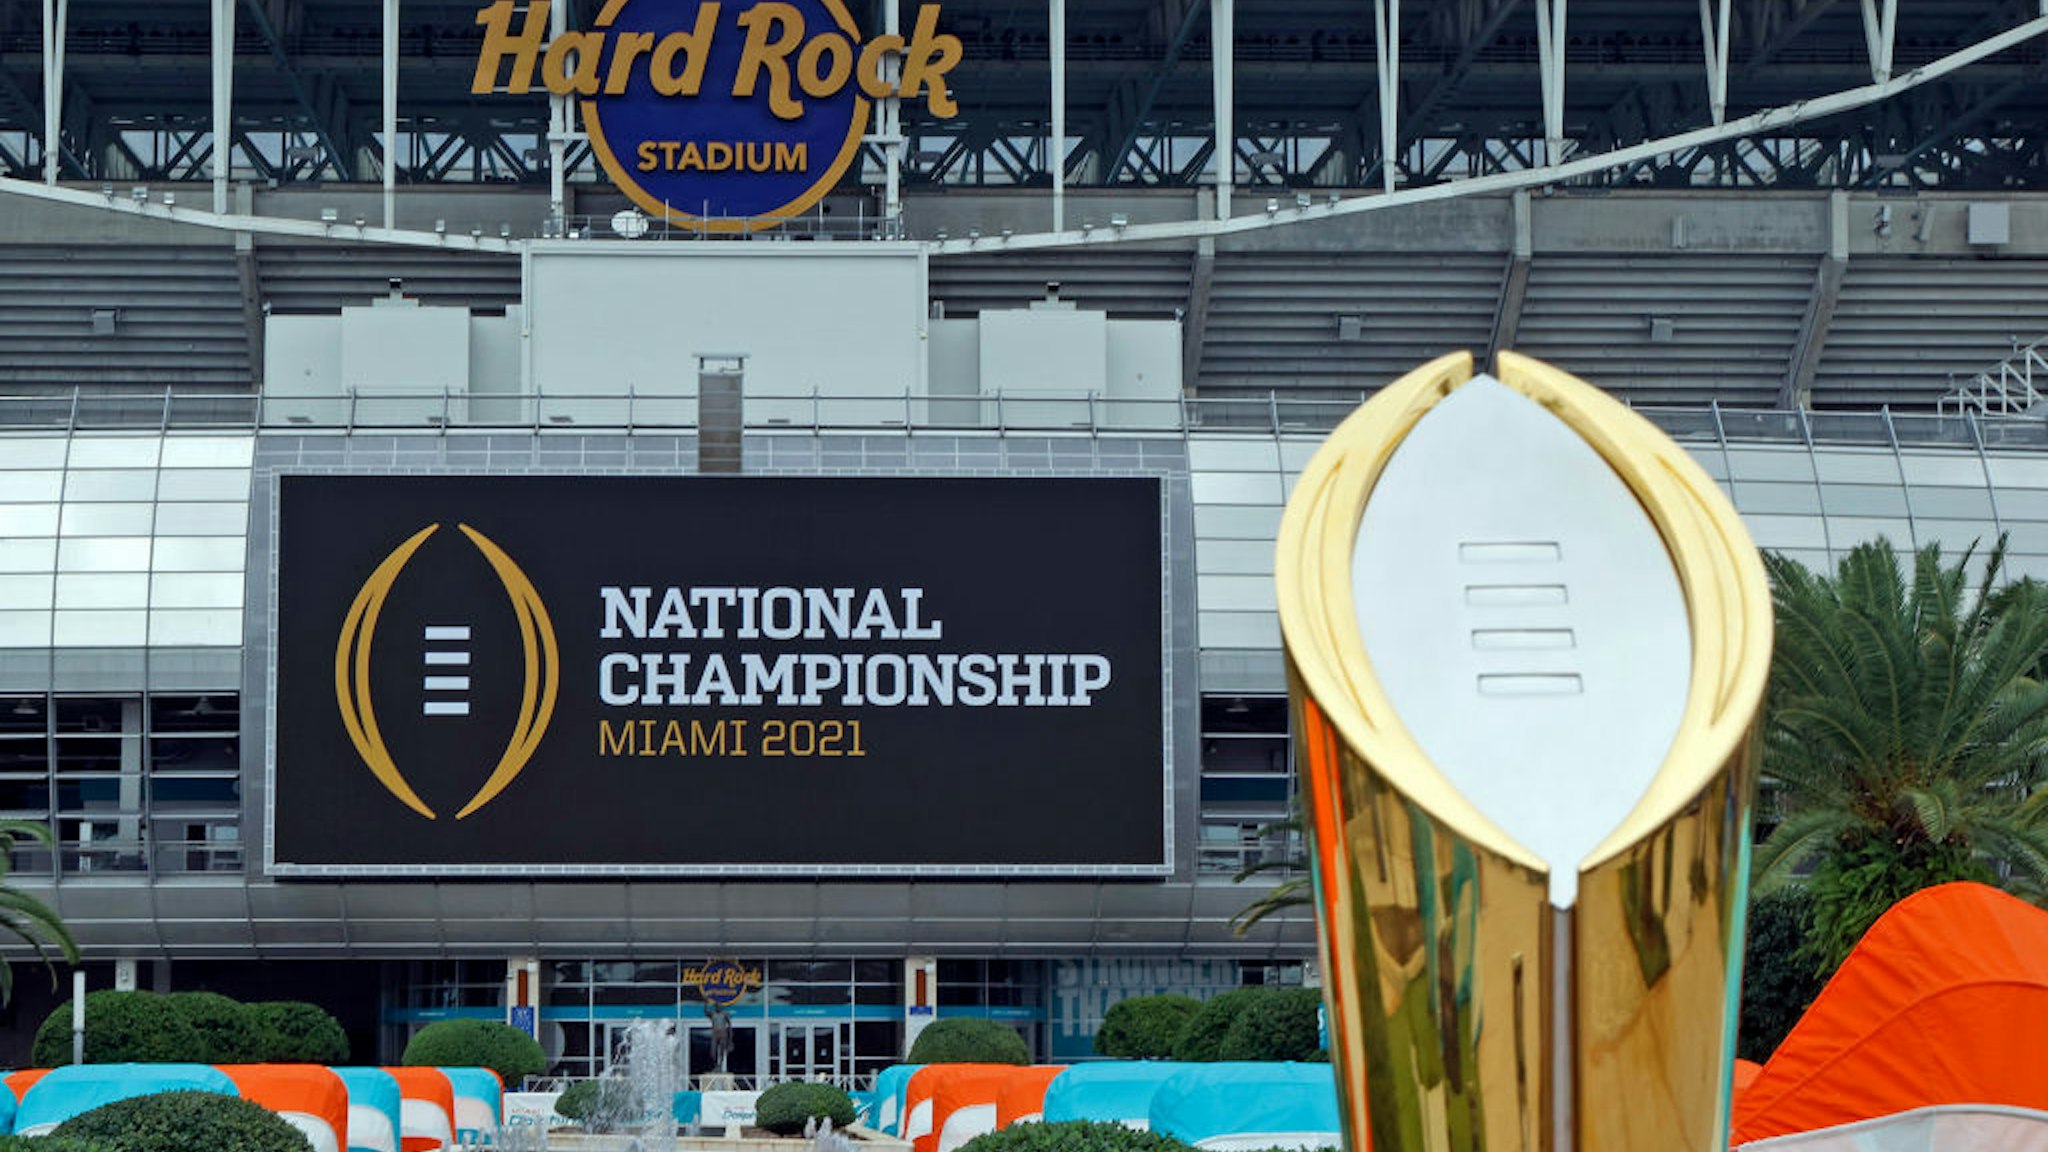 MIAMI GARDENS, FLORIDA - NOVEMBER 11: The College Football Playoff National Championship Trophy is displayed at Hard Rock Stadium on November 11, 2020 in Miami Gardens, Florida. The Championship game will be played at Hard Rock Stadium on January 11, 2021. (Photo by Joel Auerbach/Getty Images)